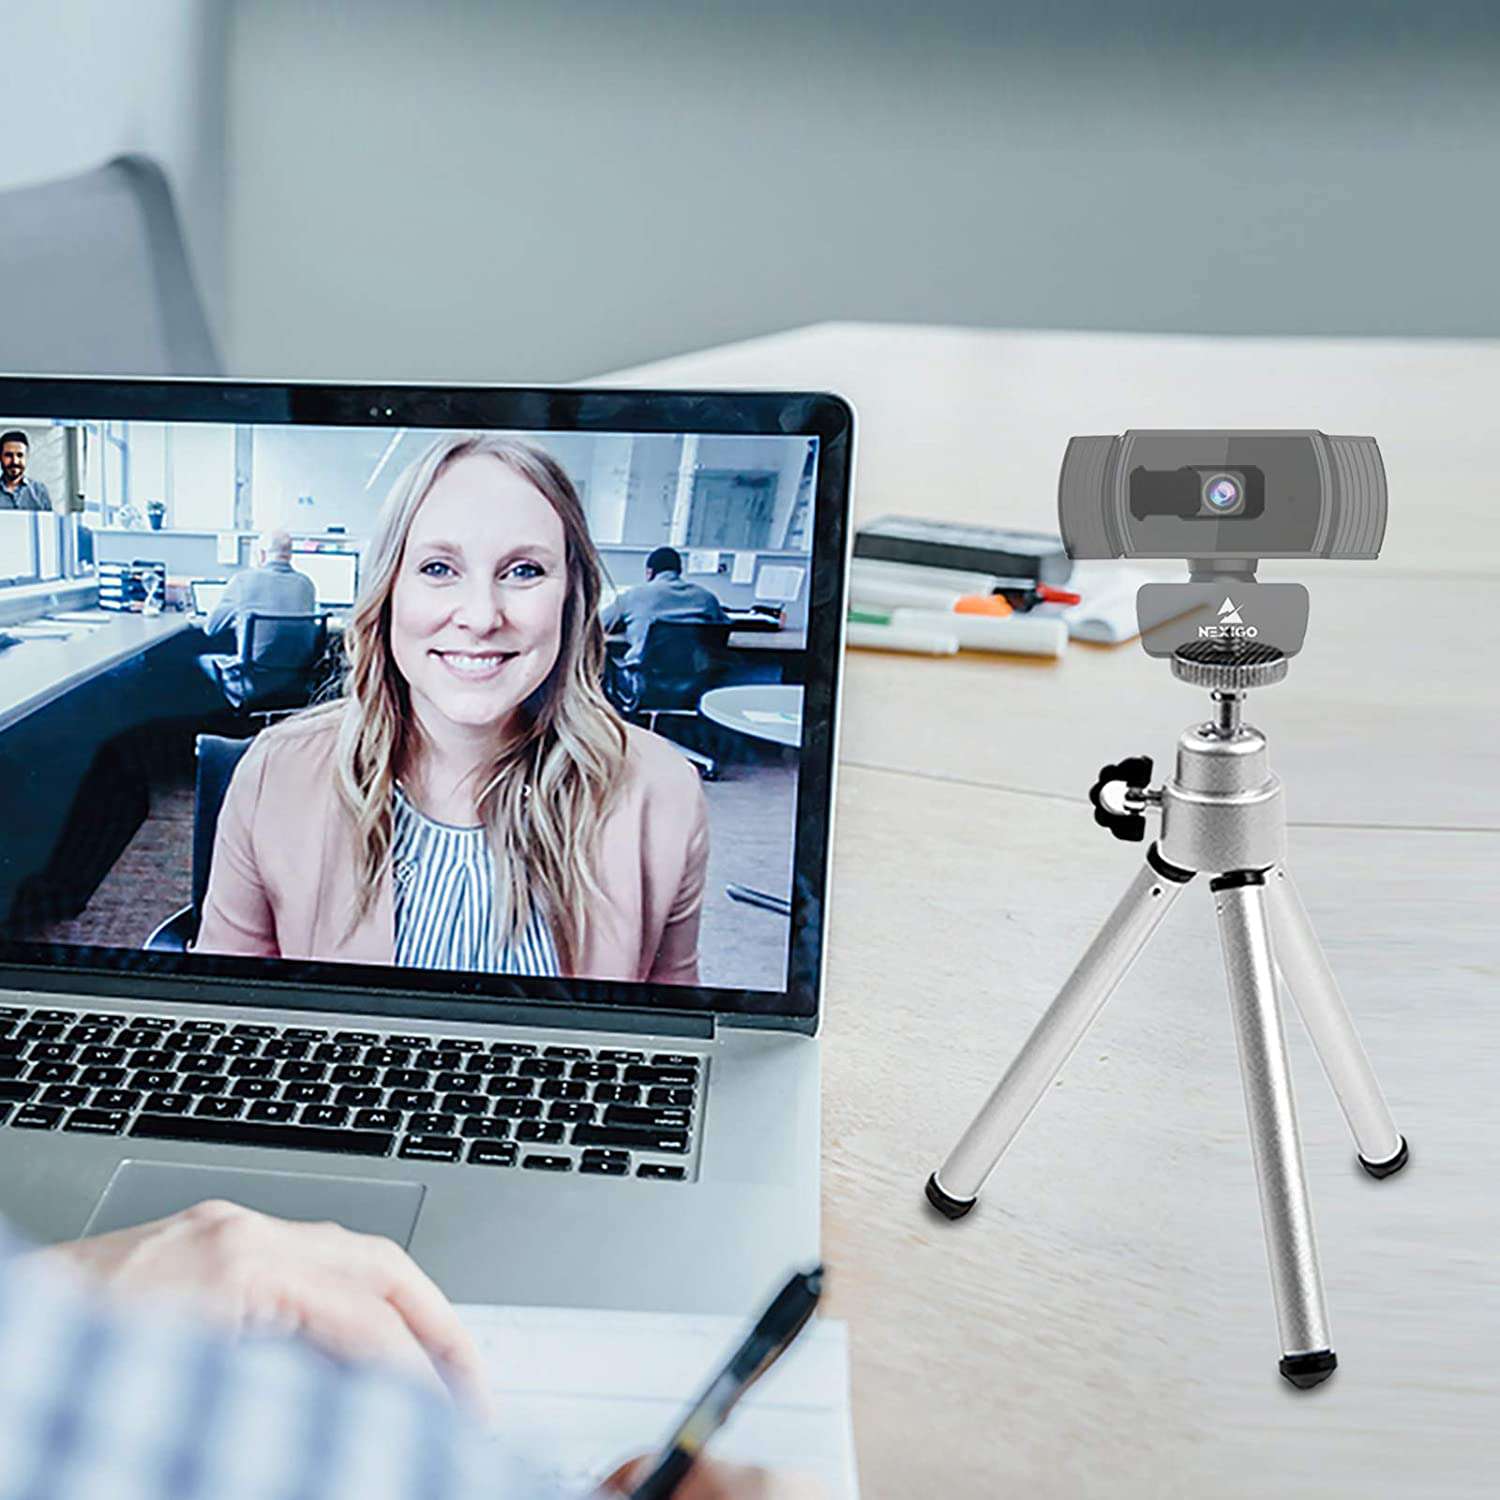 A man and a woman use the tripod to set up the webcam for a video conference.